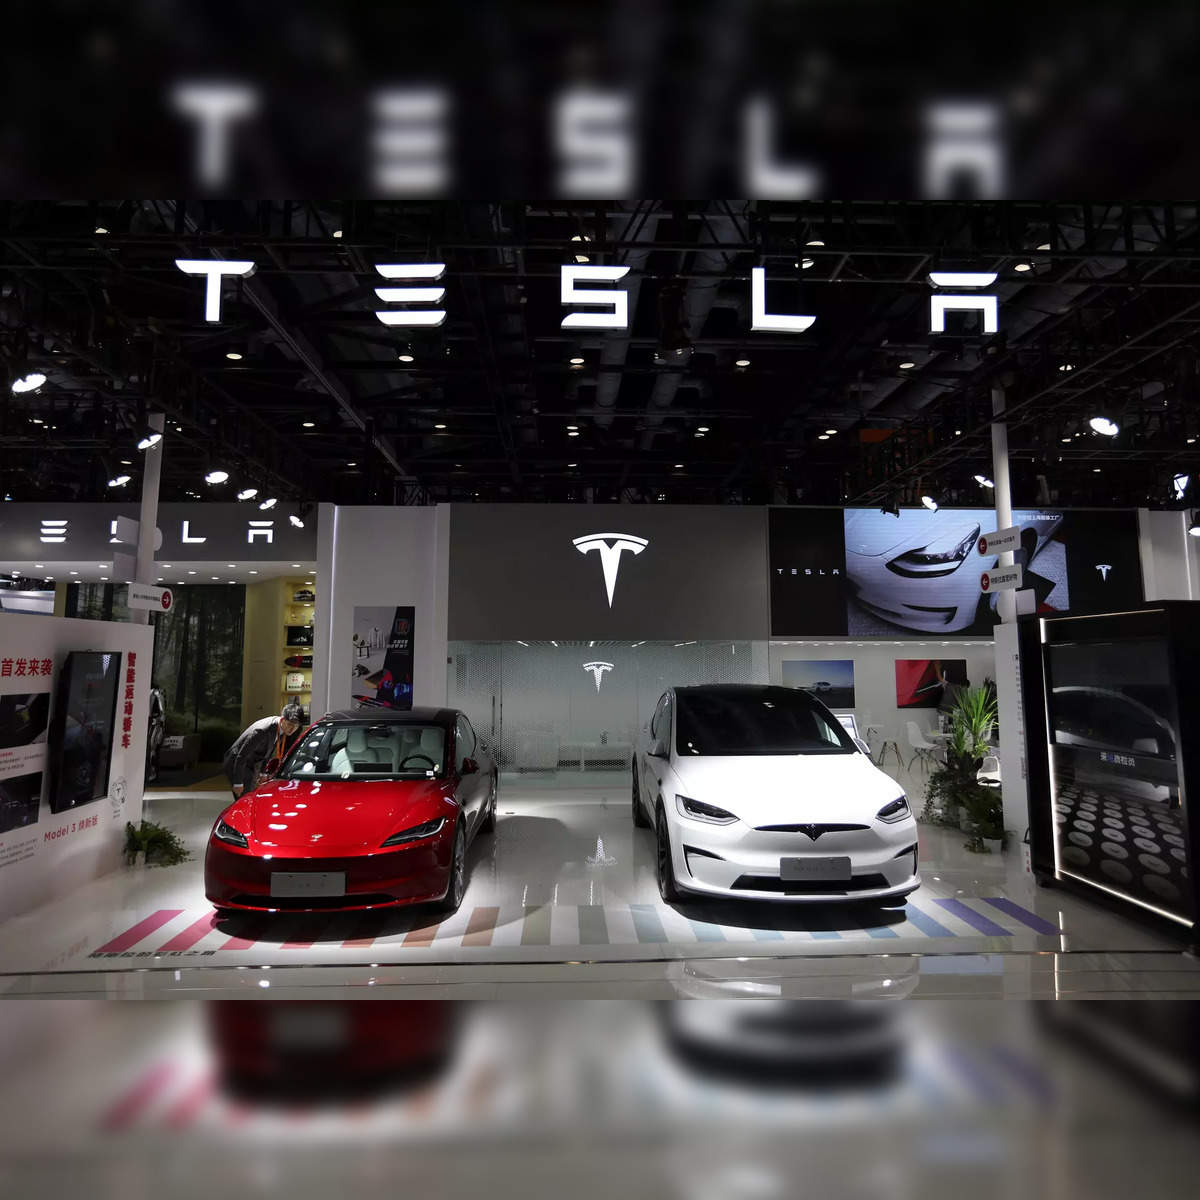 Tesla still the top EV brand in the U.S., but its lead is shrinking